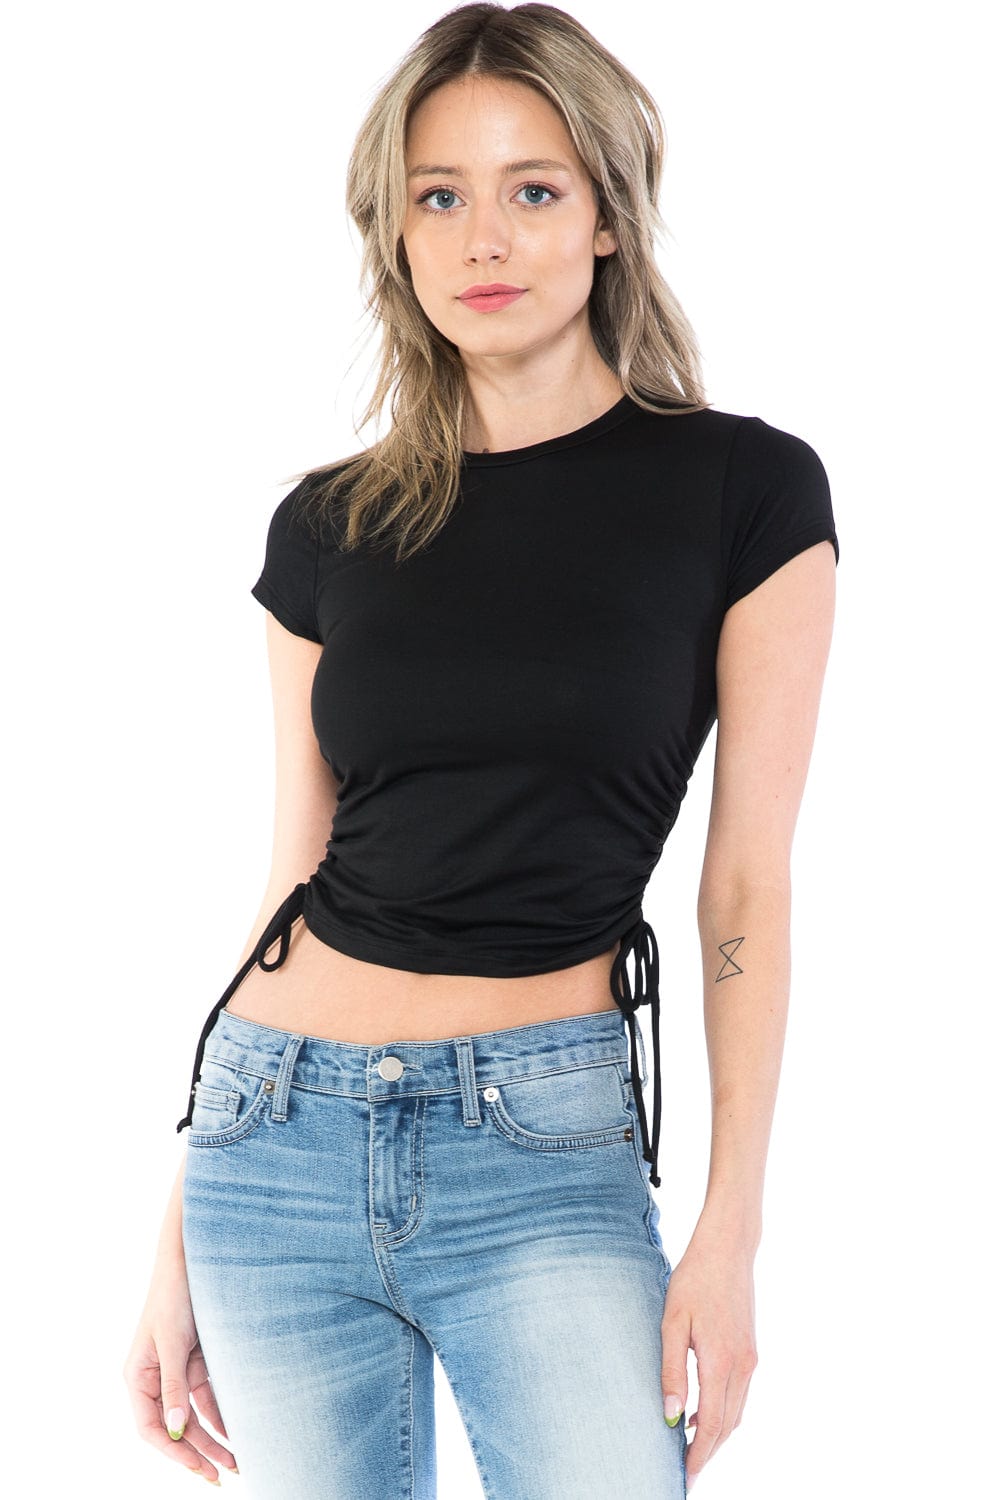 Auliné Collection Shirts & Tops Small / Black Womens Trendy Solid Color Soft Basic Ruched Tie Crop Top